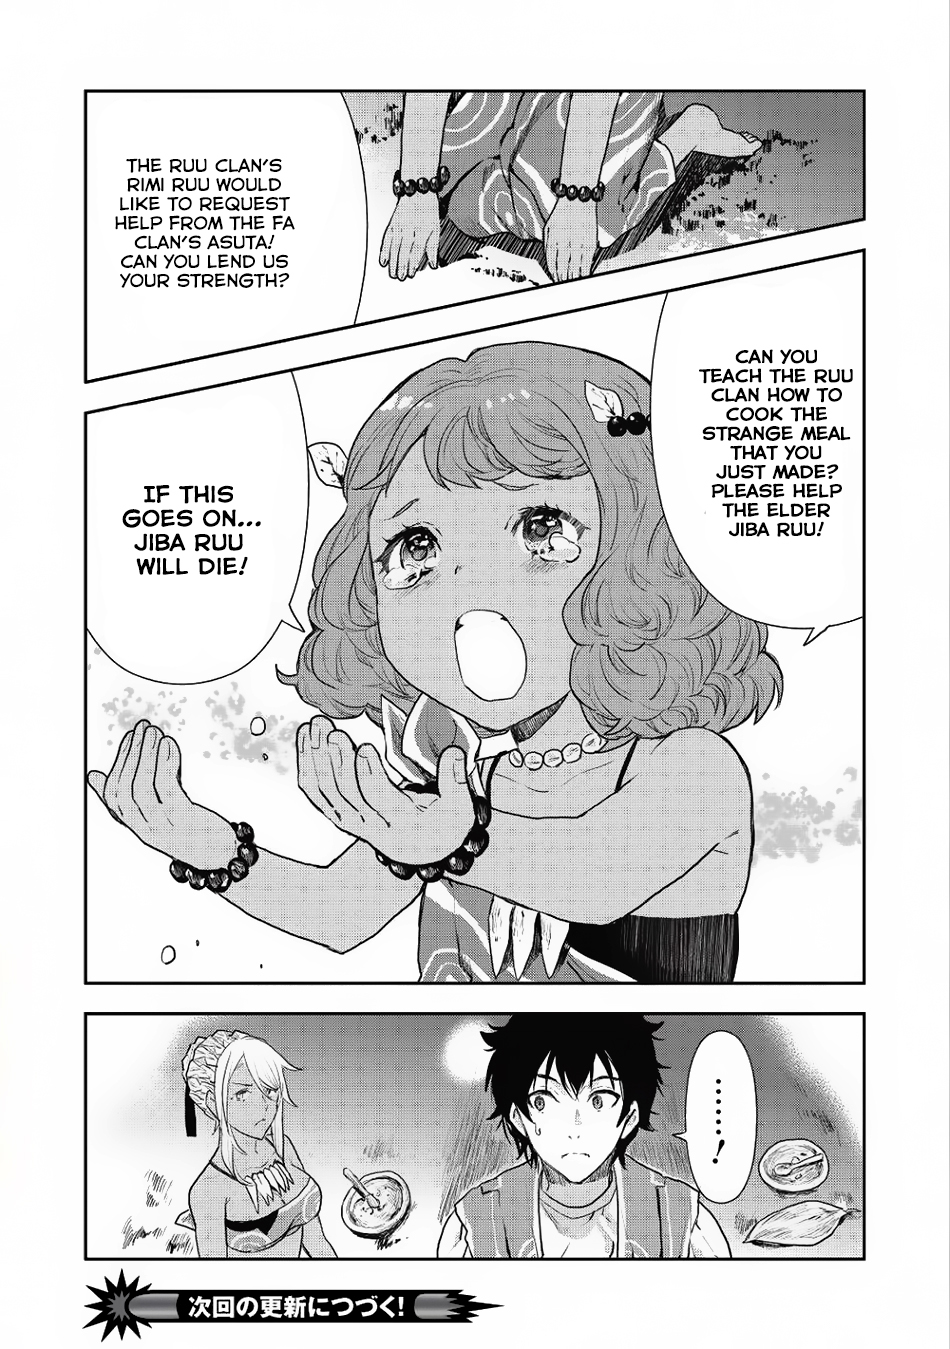 Isekai Ryouridou Vol. 1 Ch. 5 The Little Guest